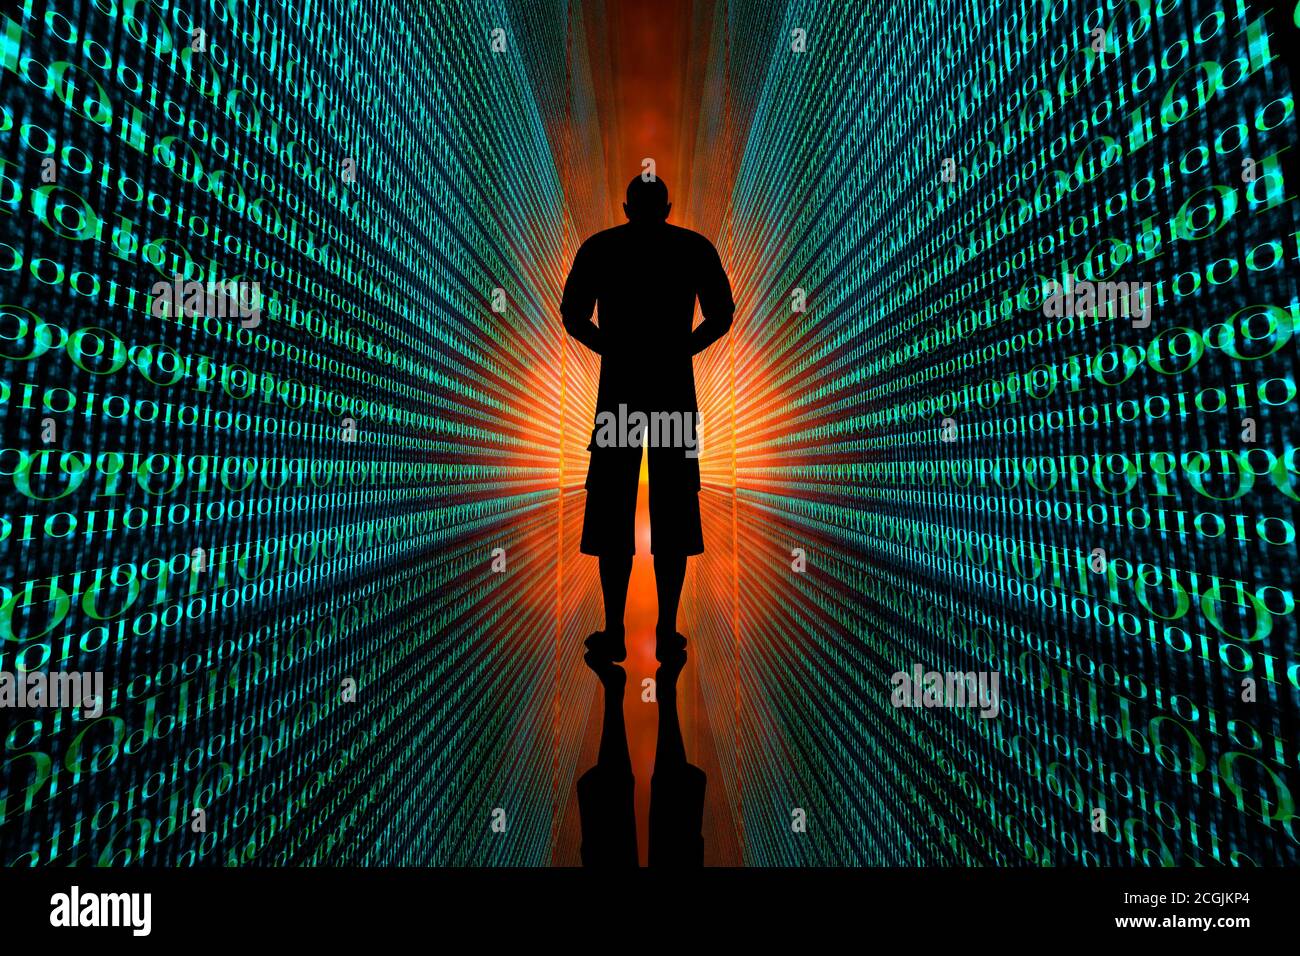 3D Illustration of a man standing between infinite lines of code symbolizing his digital identity and data tracks. Stock Photo